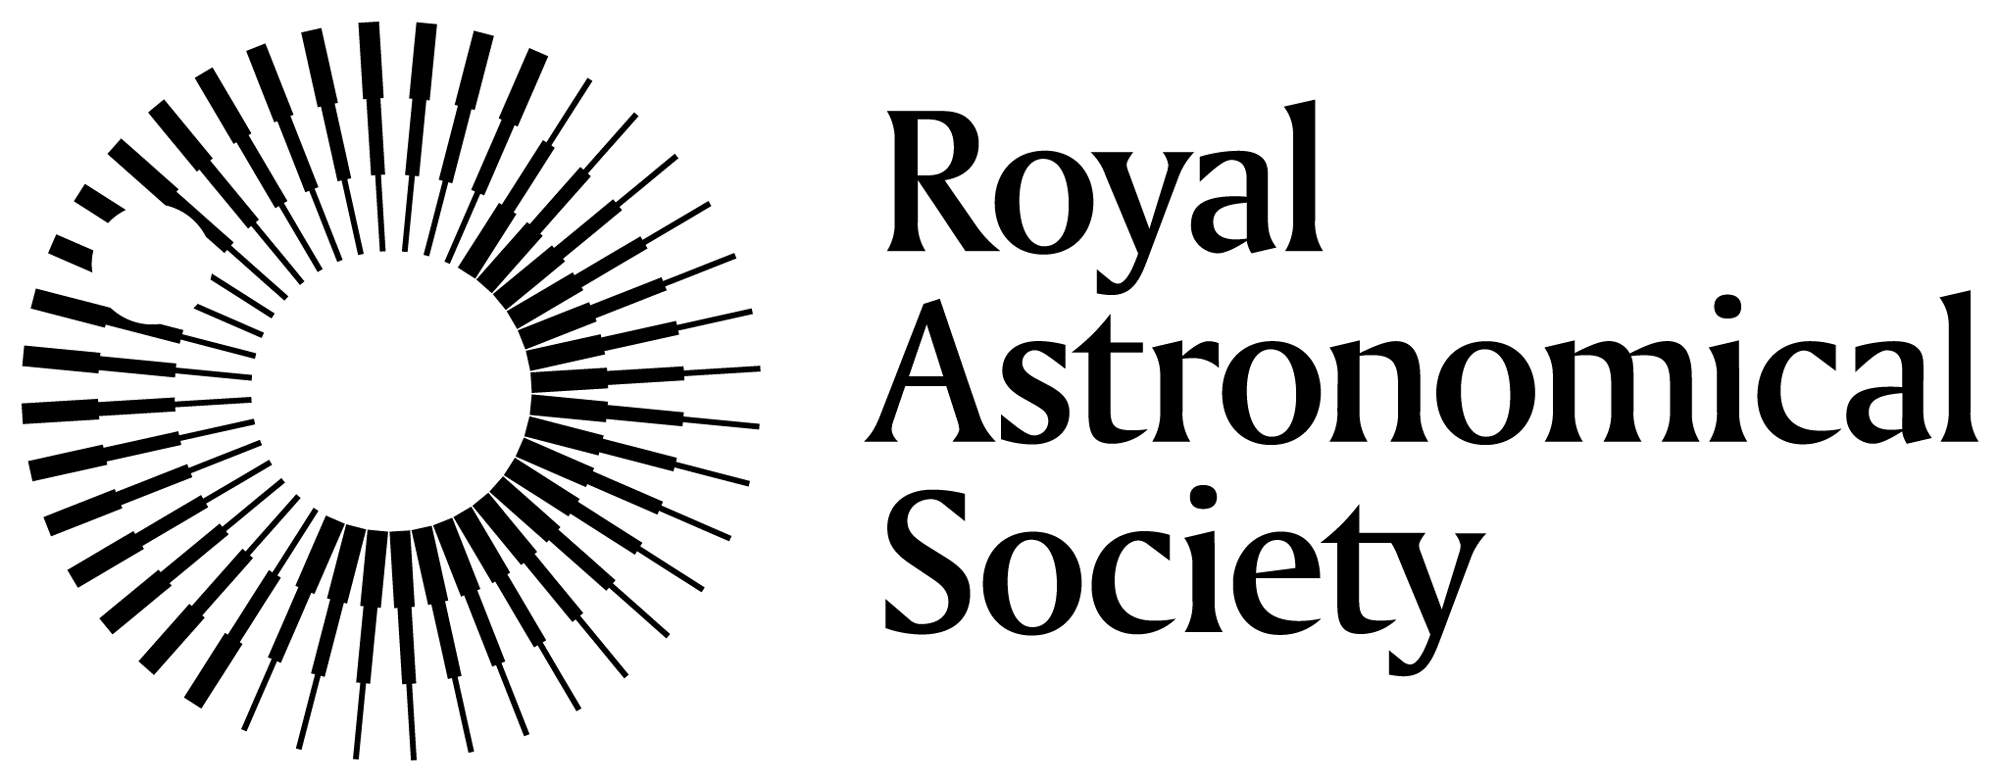 New Logo and Identity for Royal Astronomical Society by Johnson Banks